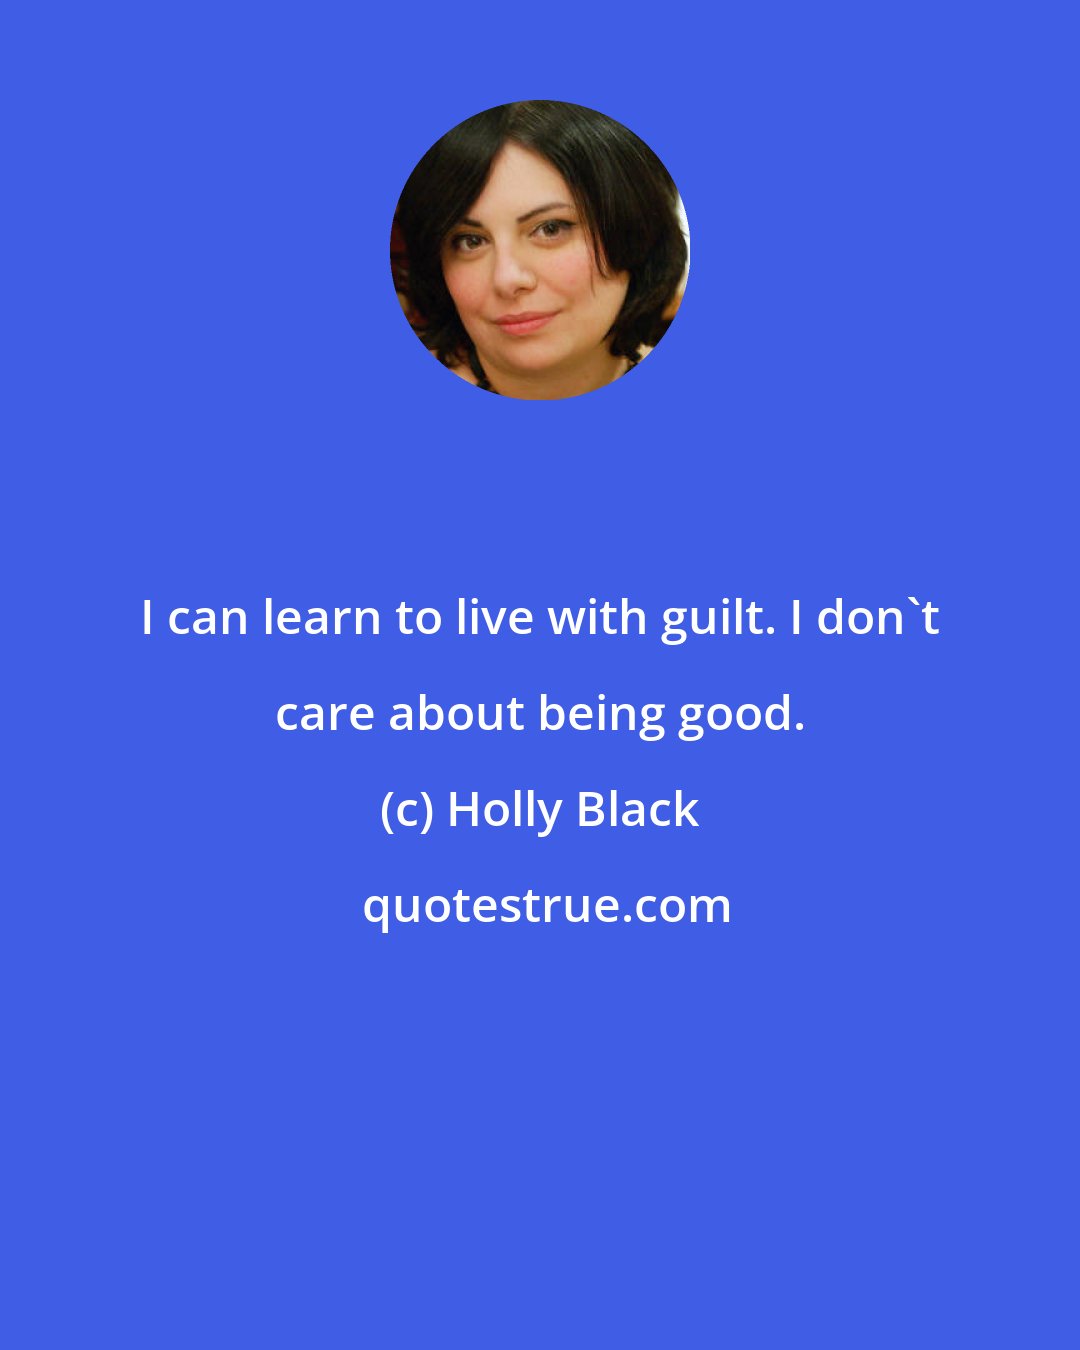 Holly Black: I can learn to live with guilt. I don't care about being good.